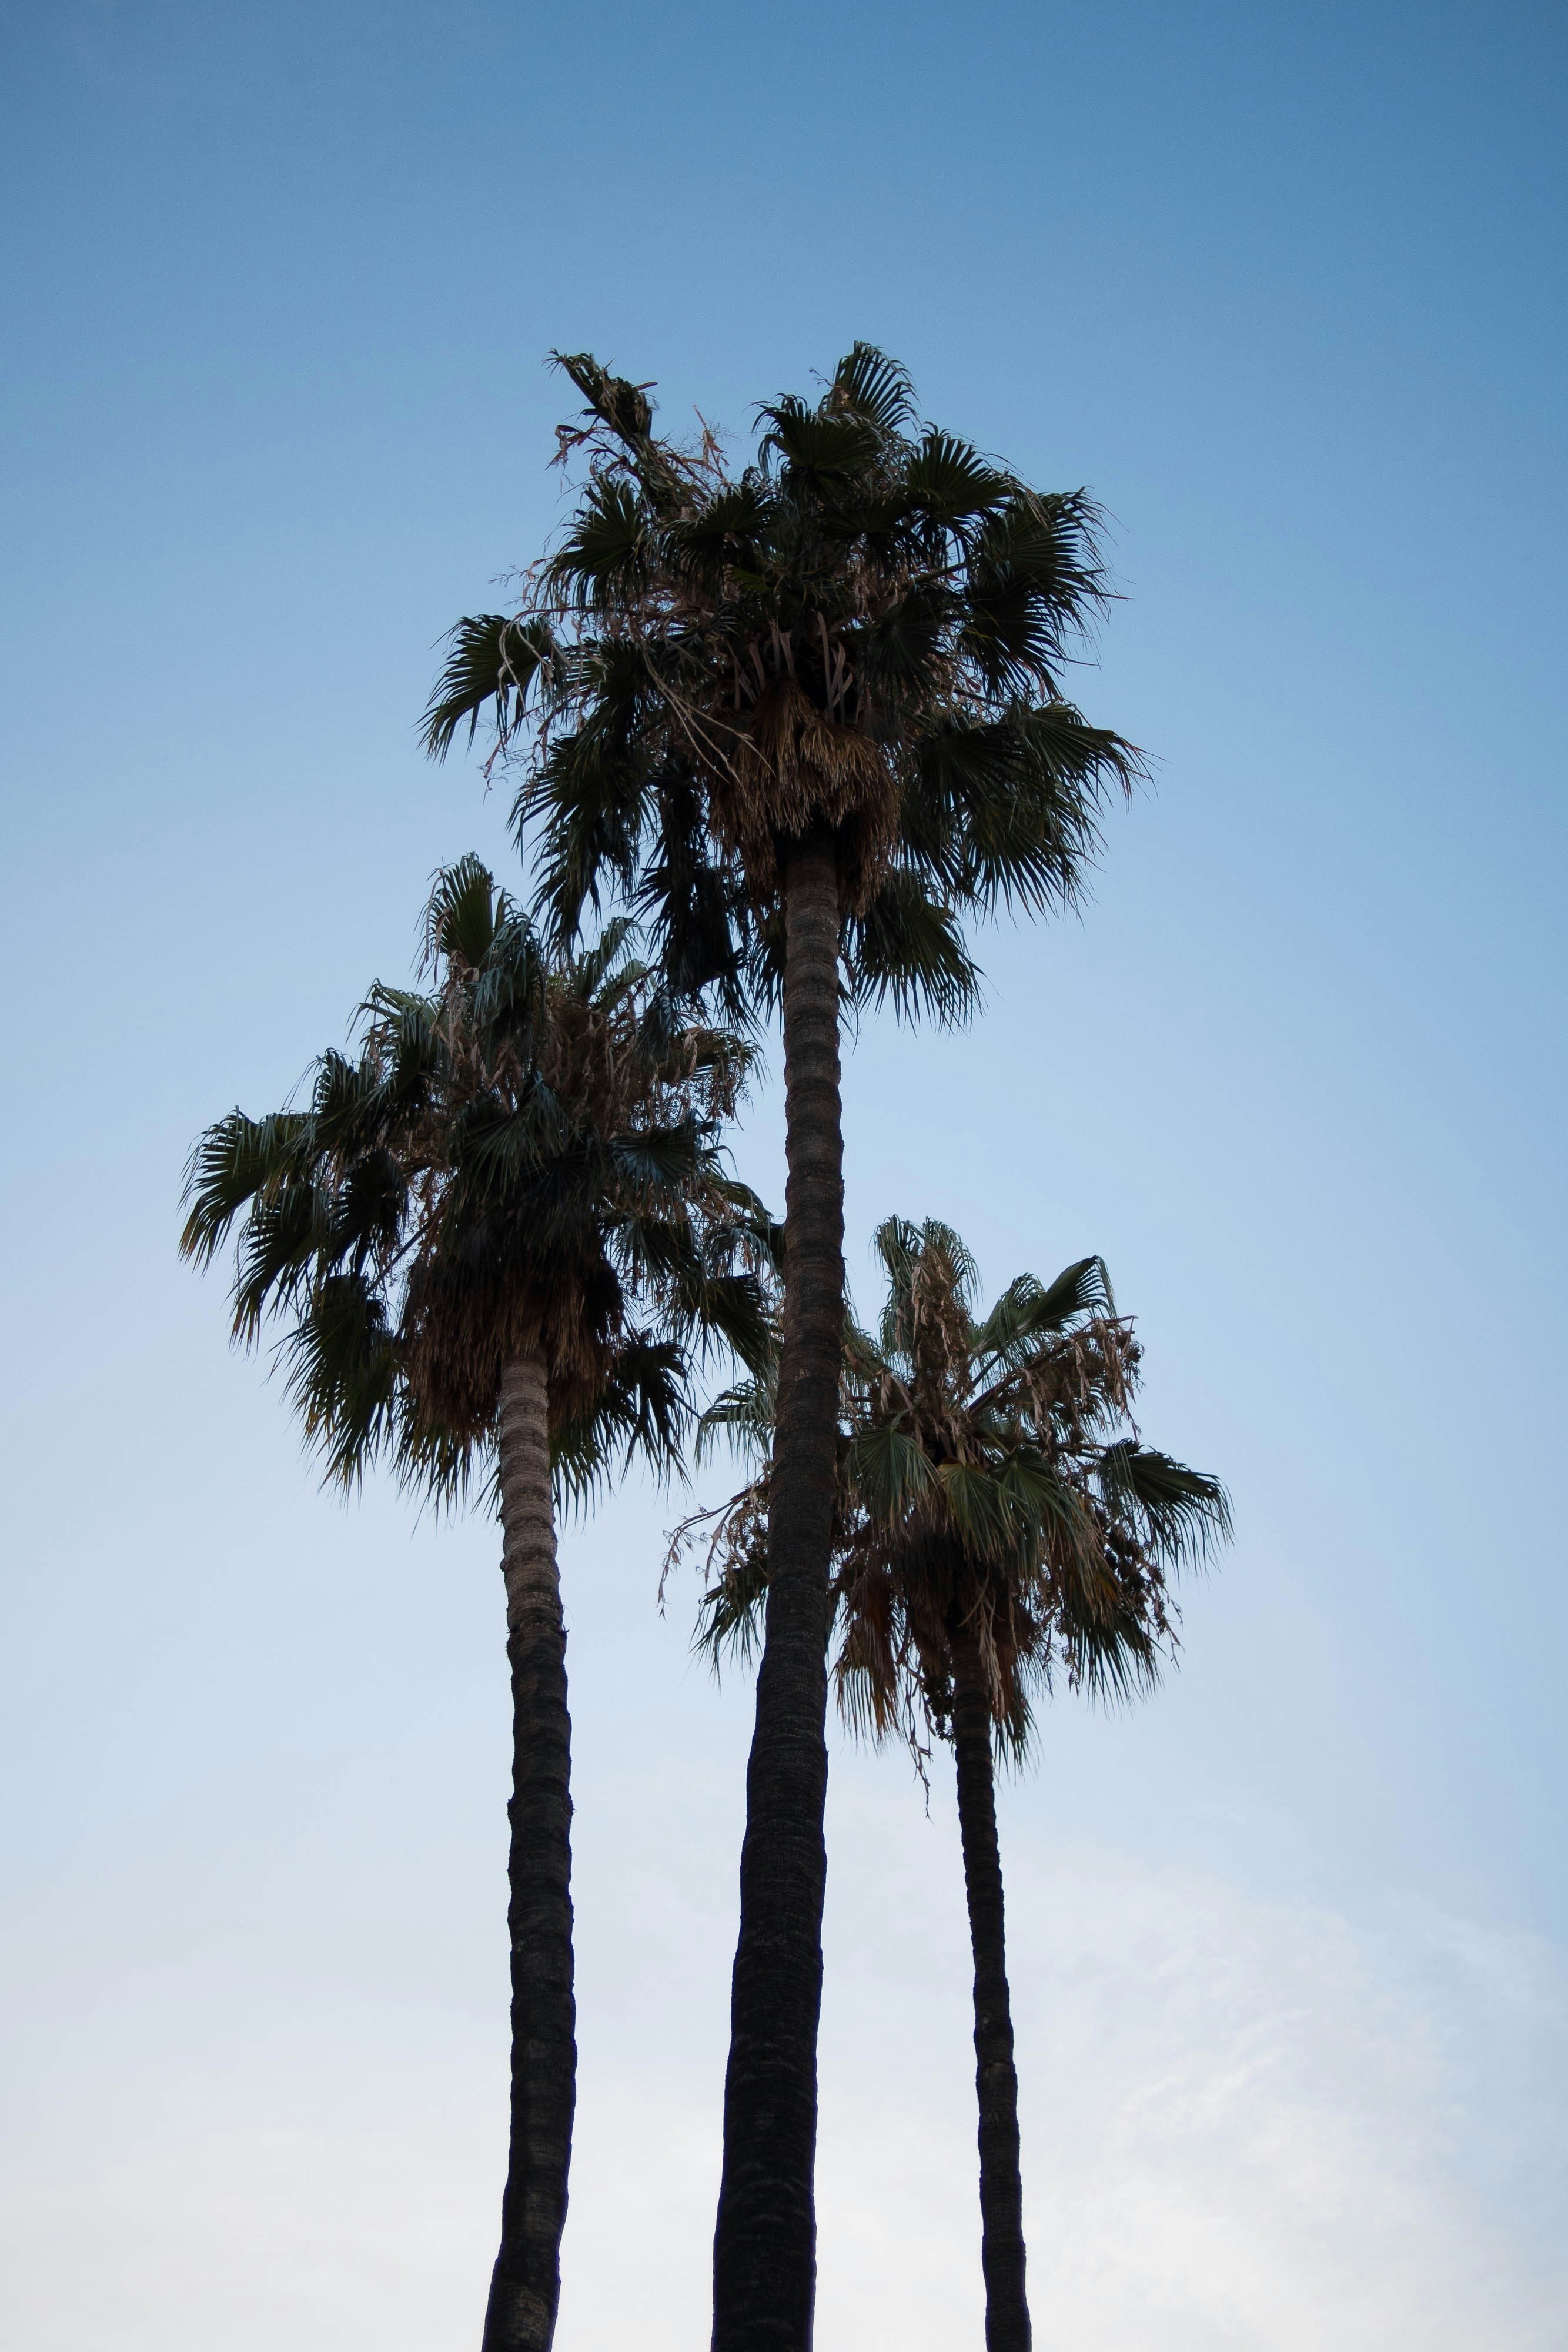 Choose from a curated selection of palm tree photos. Always free on Unsplash.